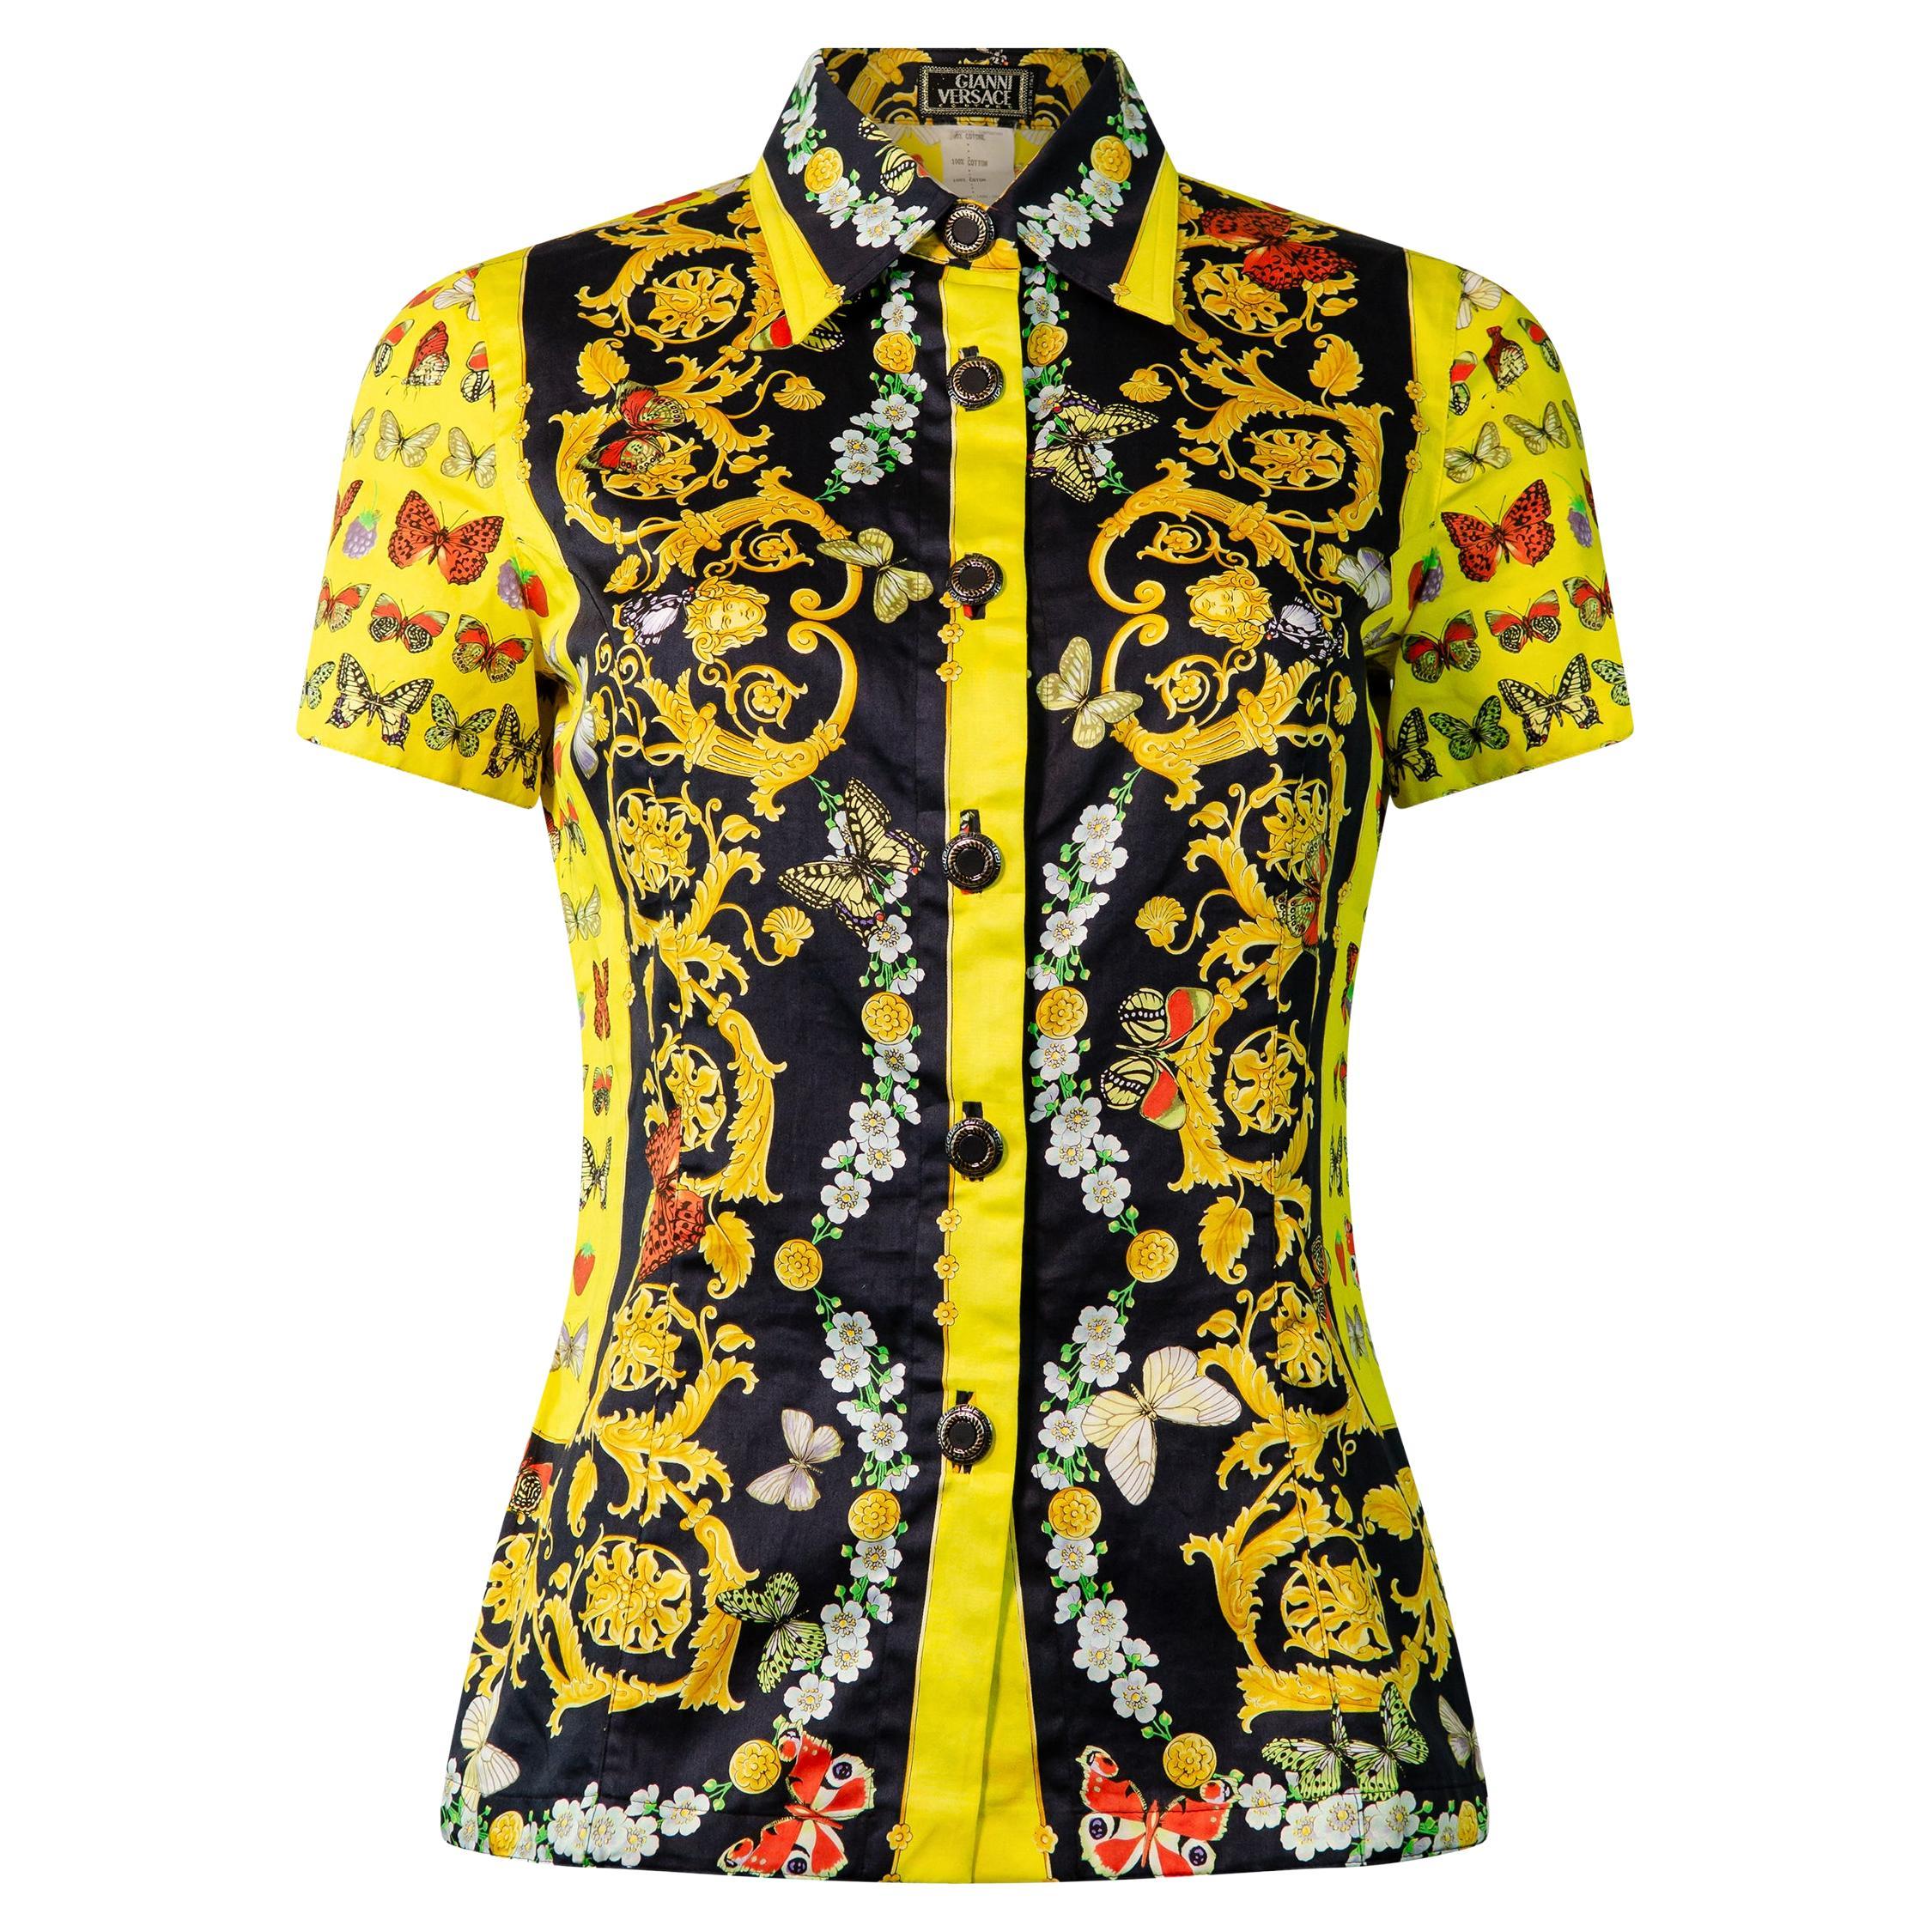 VERSACE S/S 1995 Vintage Iconic Butterfly Print Shirt For Sale